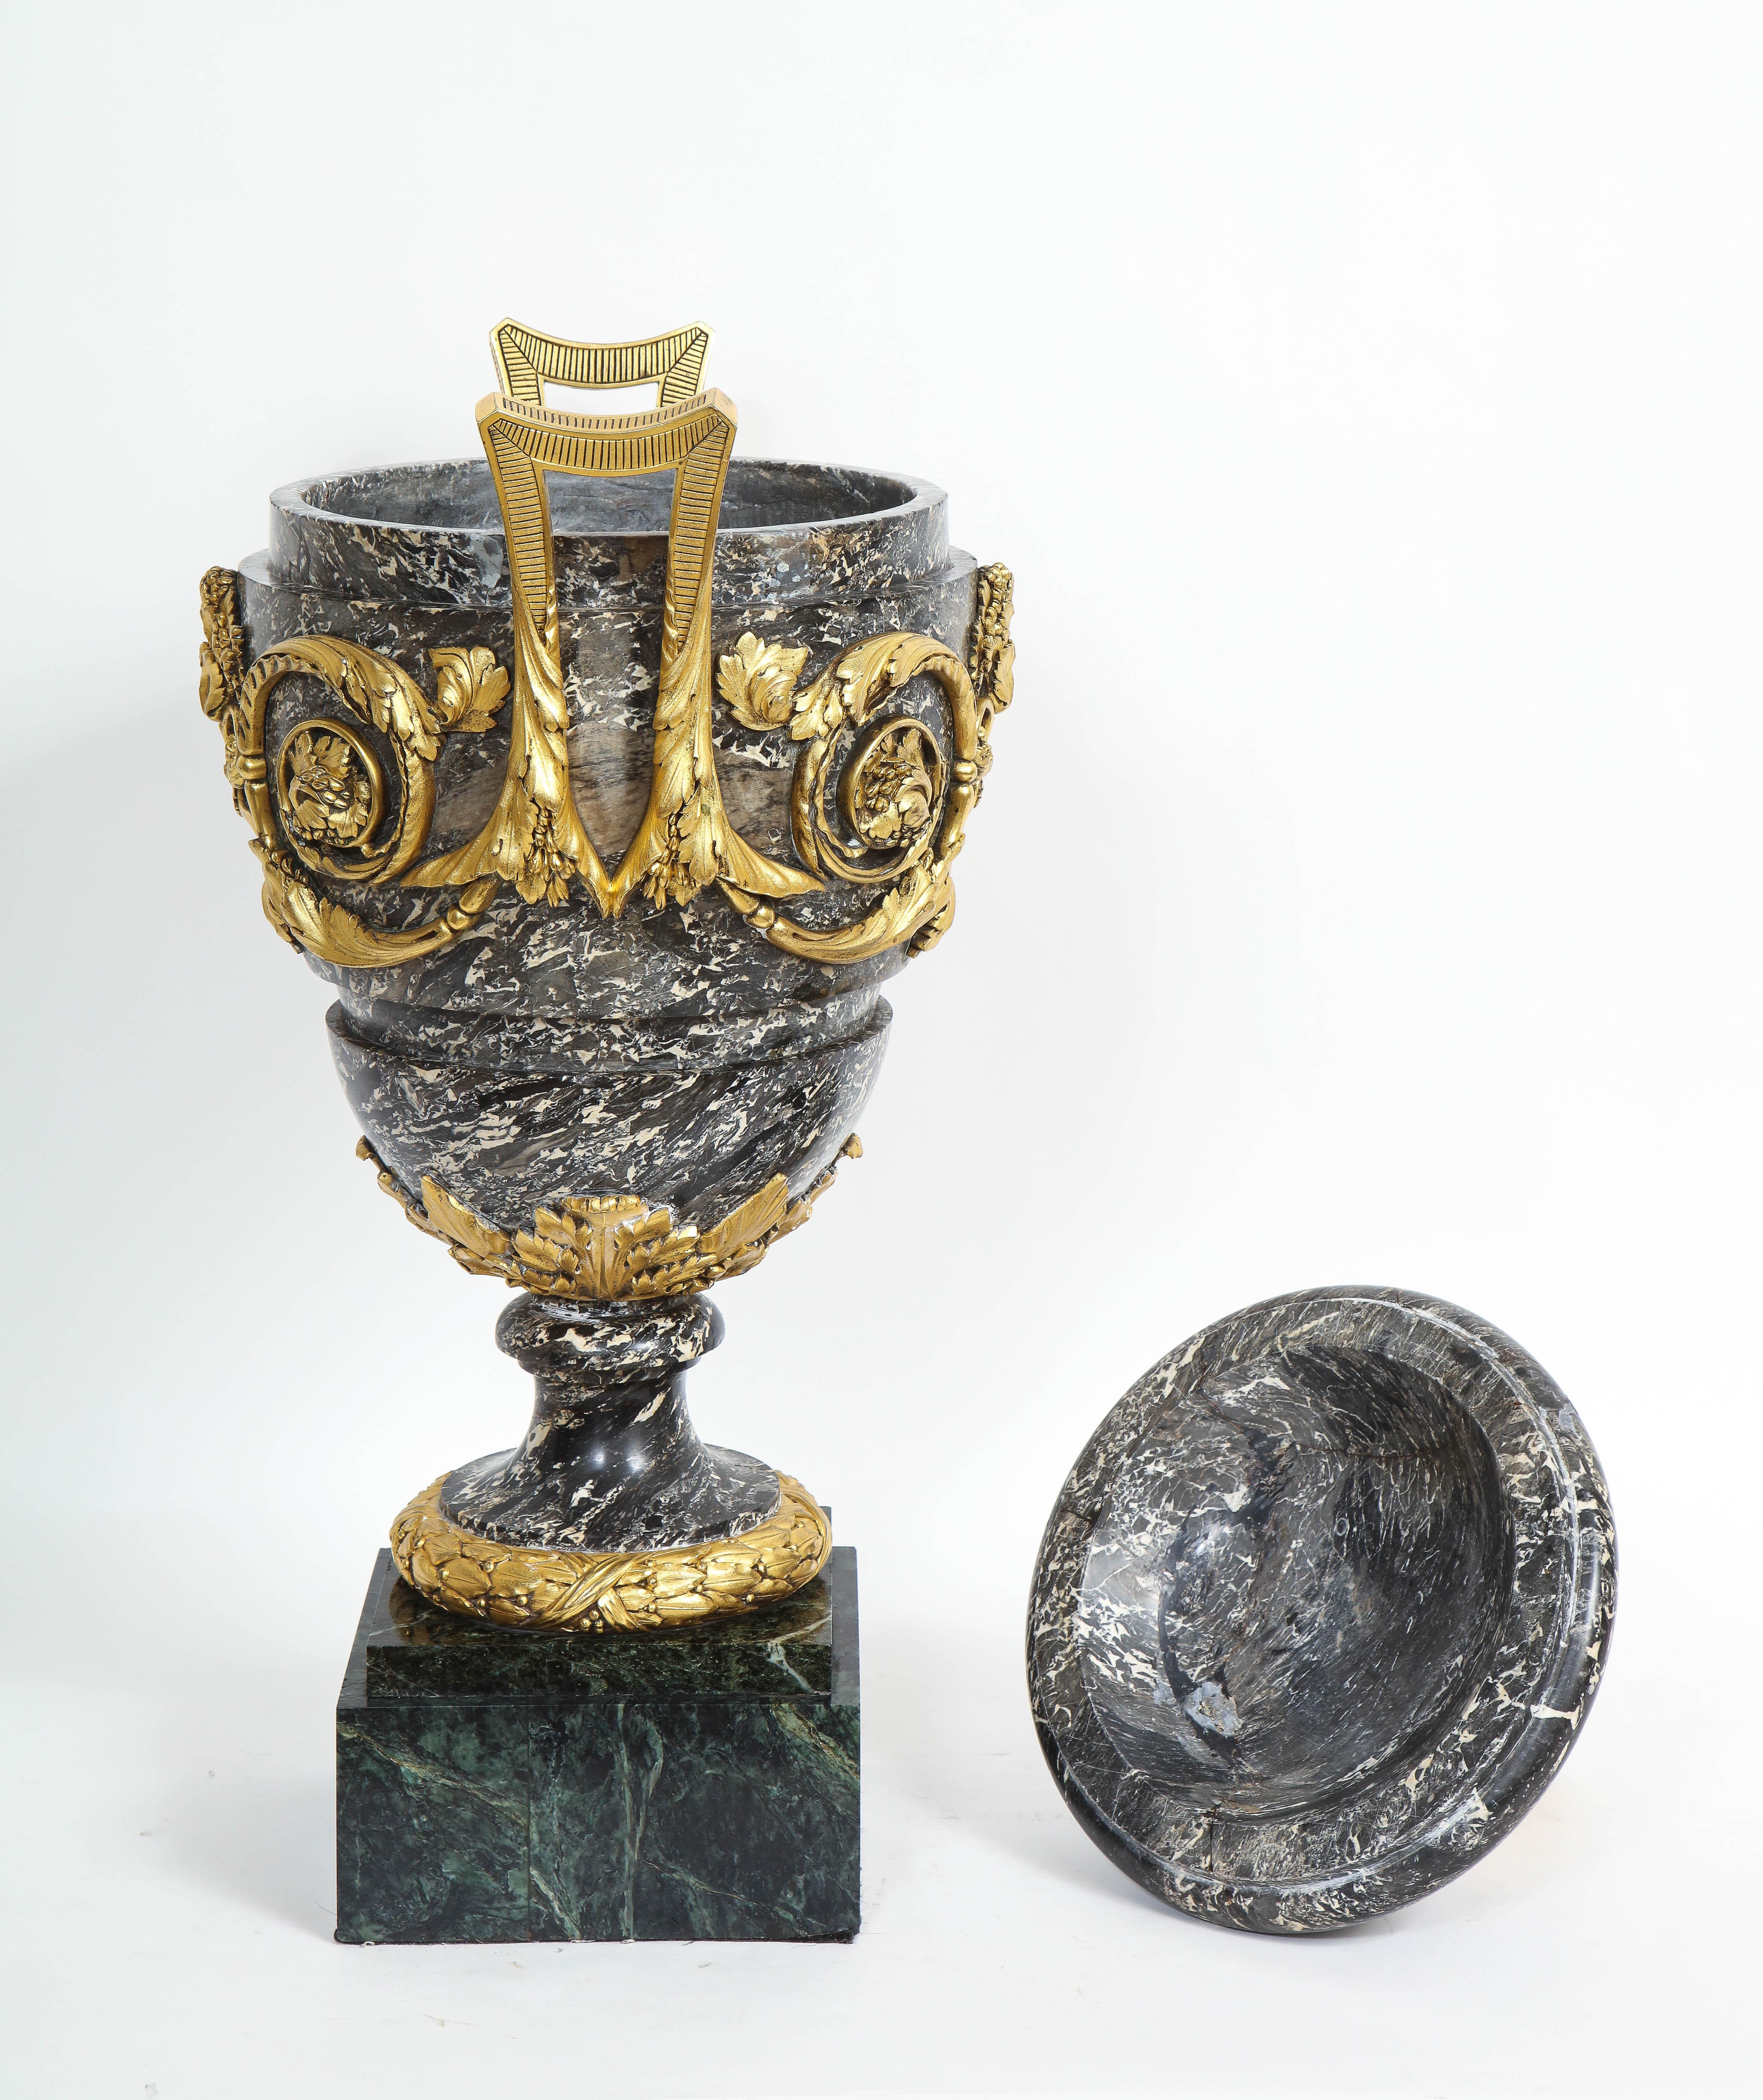 A Monumental 18/19th C. French Ormolu Mounted Grey Marble Covered Urn w/ Handles For Sale 4